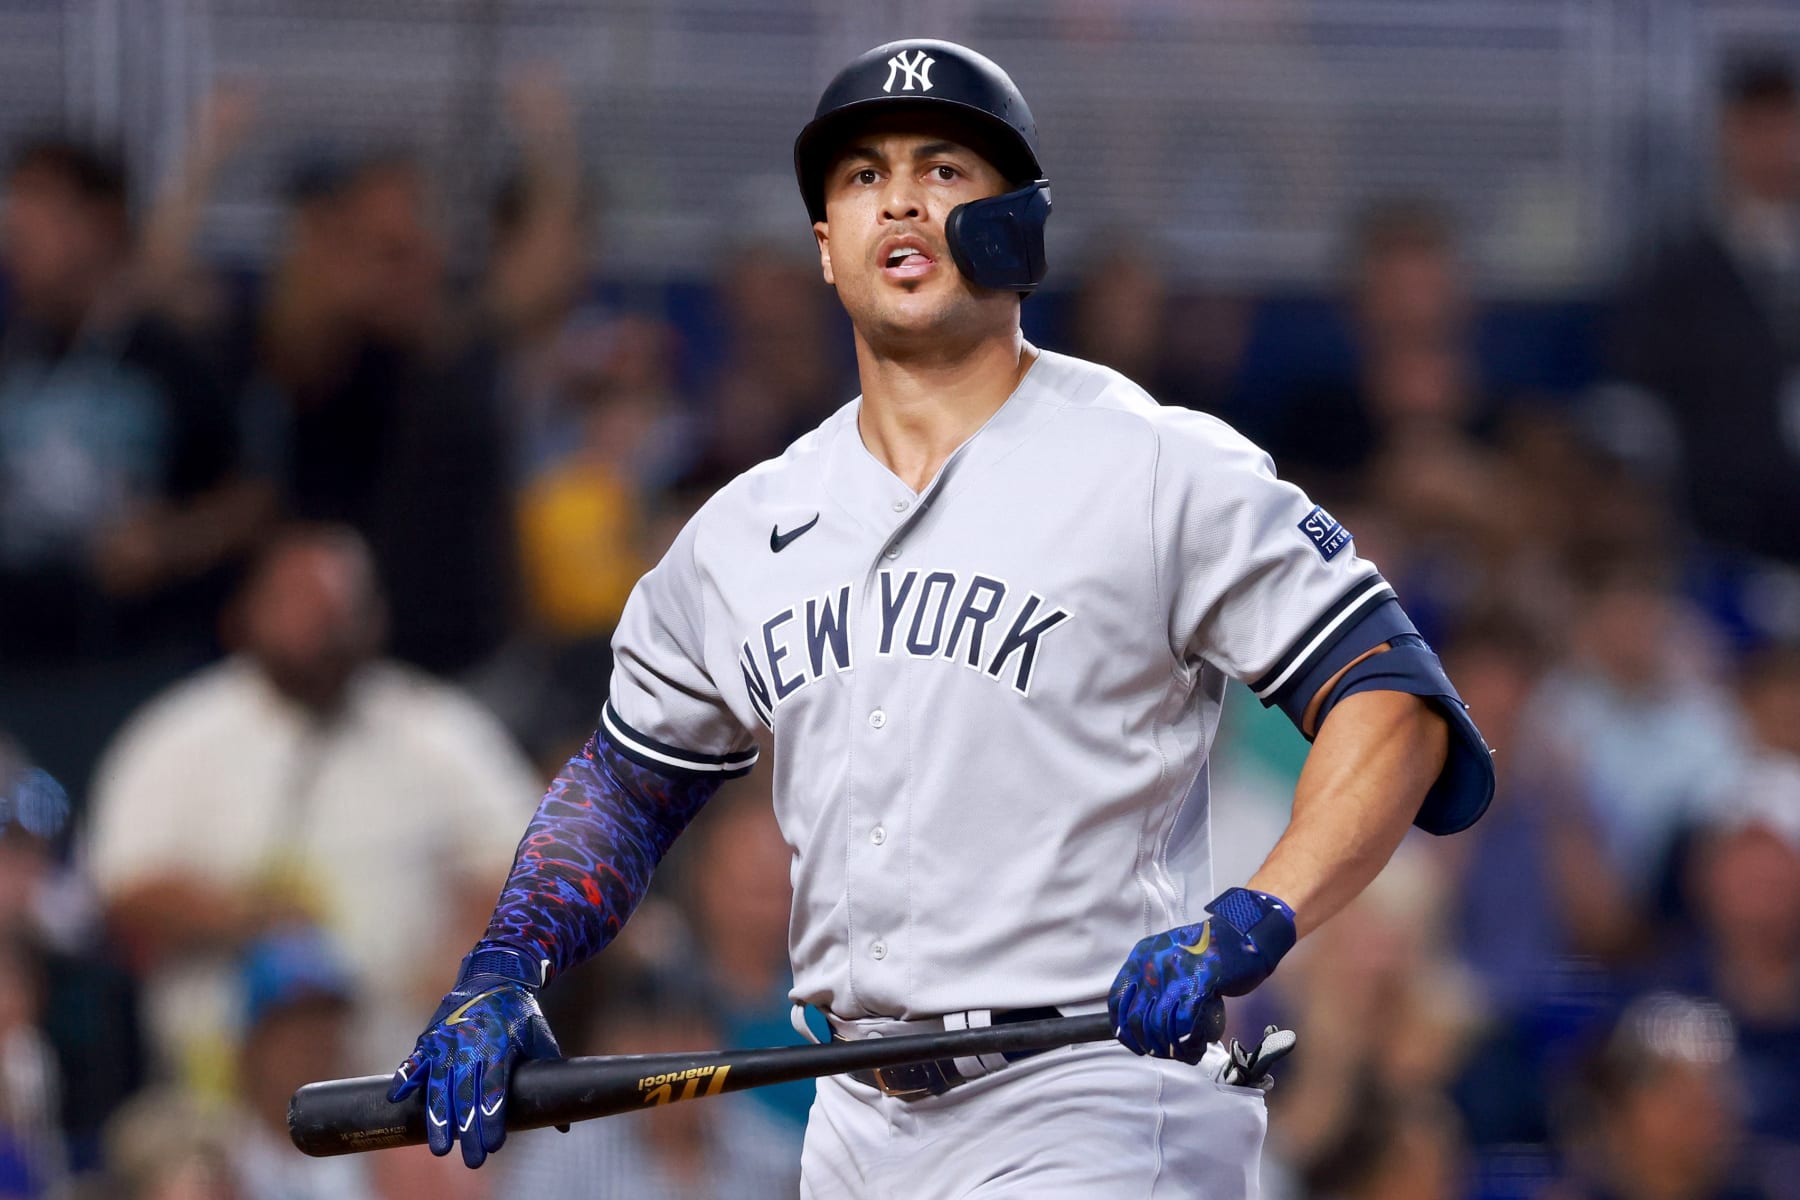 Giancarlo Stanton finally Yankees All-Star after frustrating start